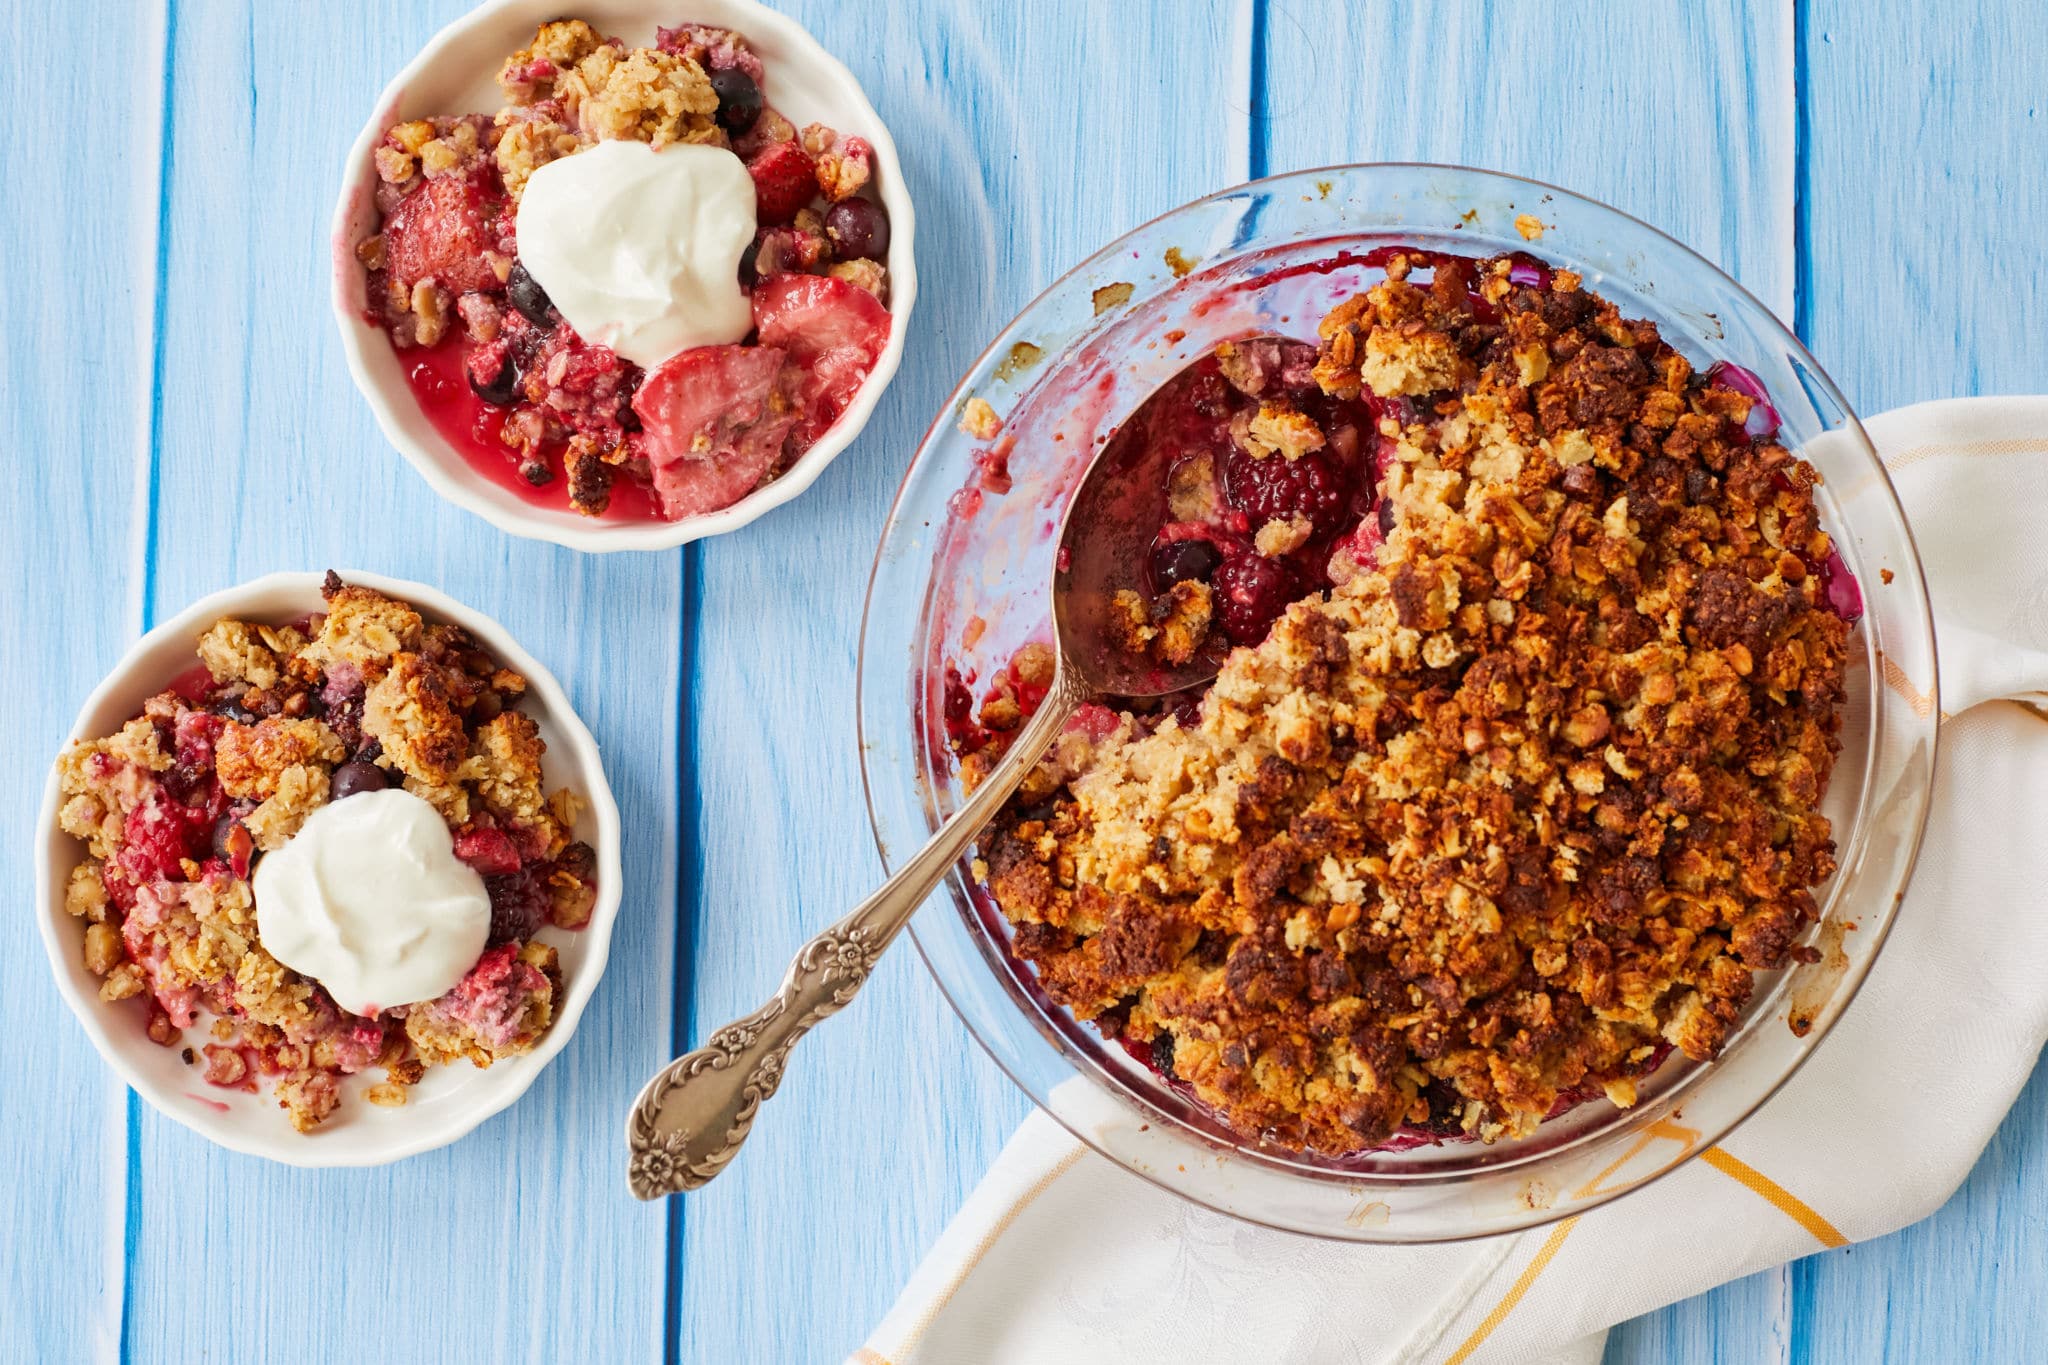 Two servings of healthy breakfast crisp are presented in two white bowls next to the berry crisp in the pie tin. There is a dollop of Greek yogurt on the two servings.